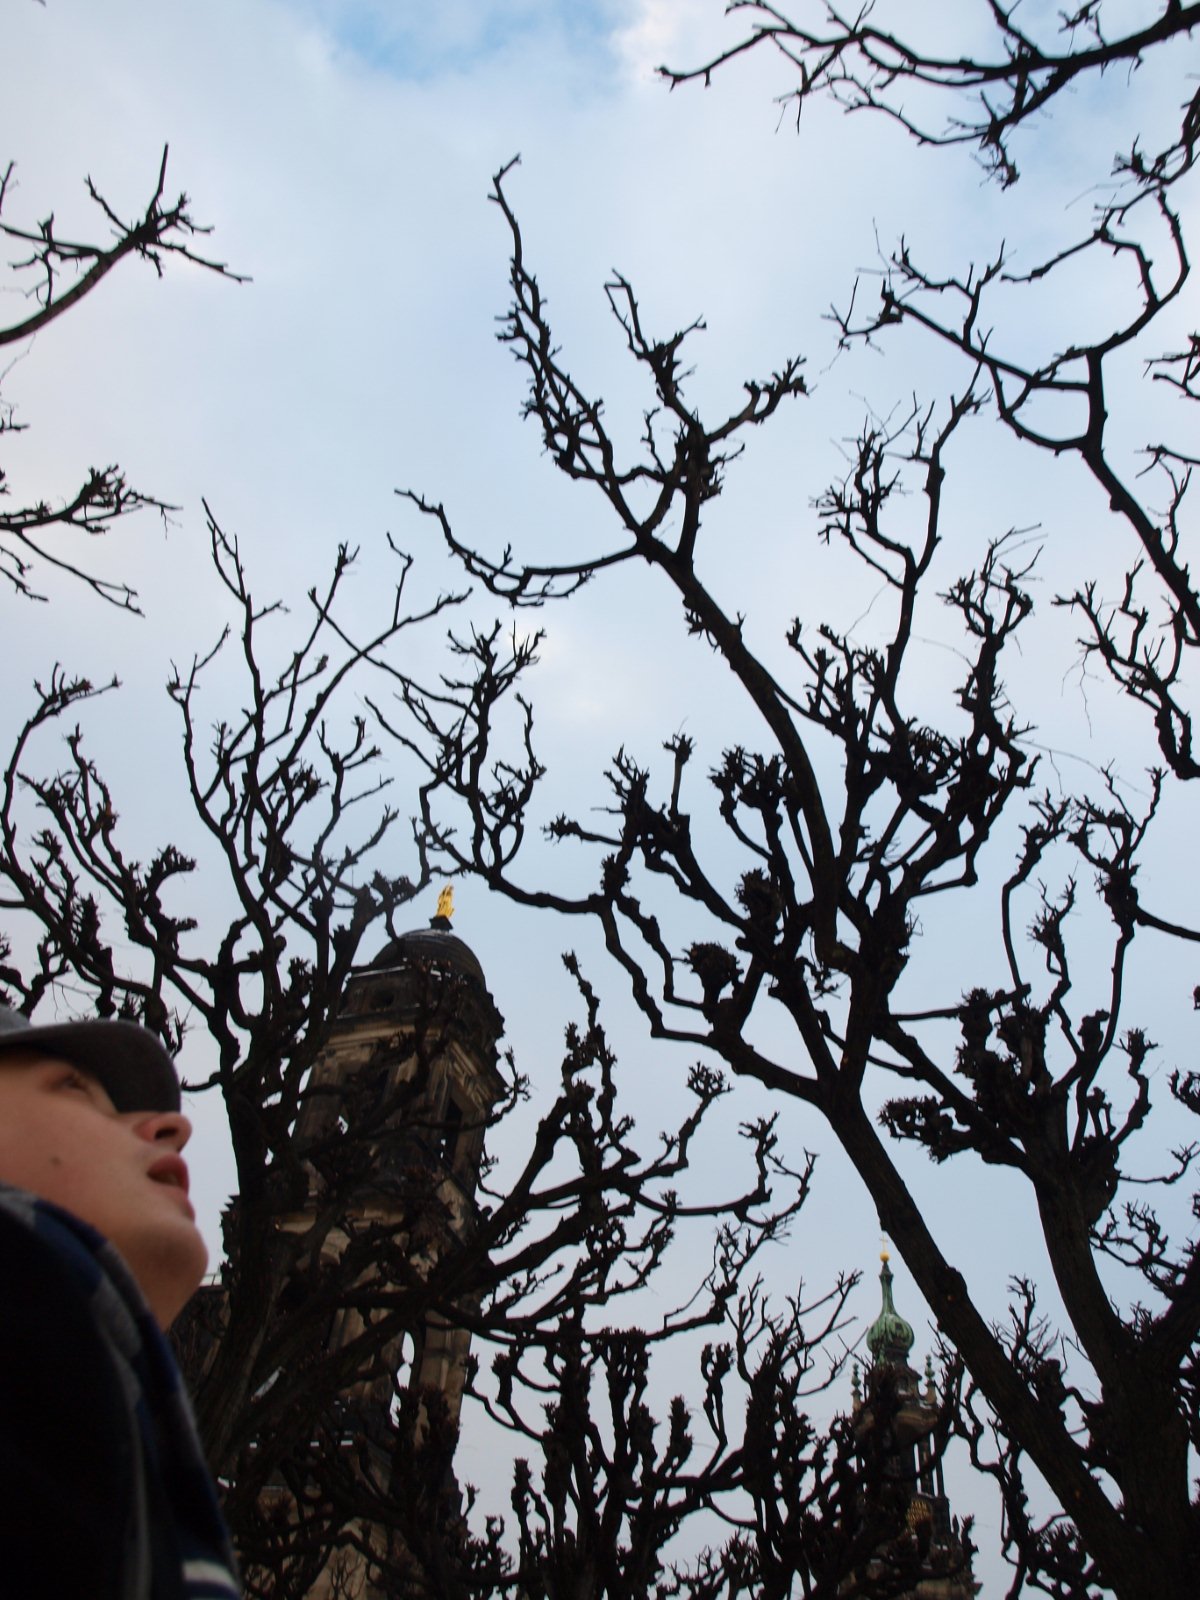 man looking up at barren trees with bird sitting in top